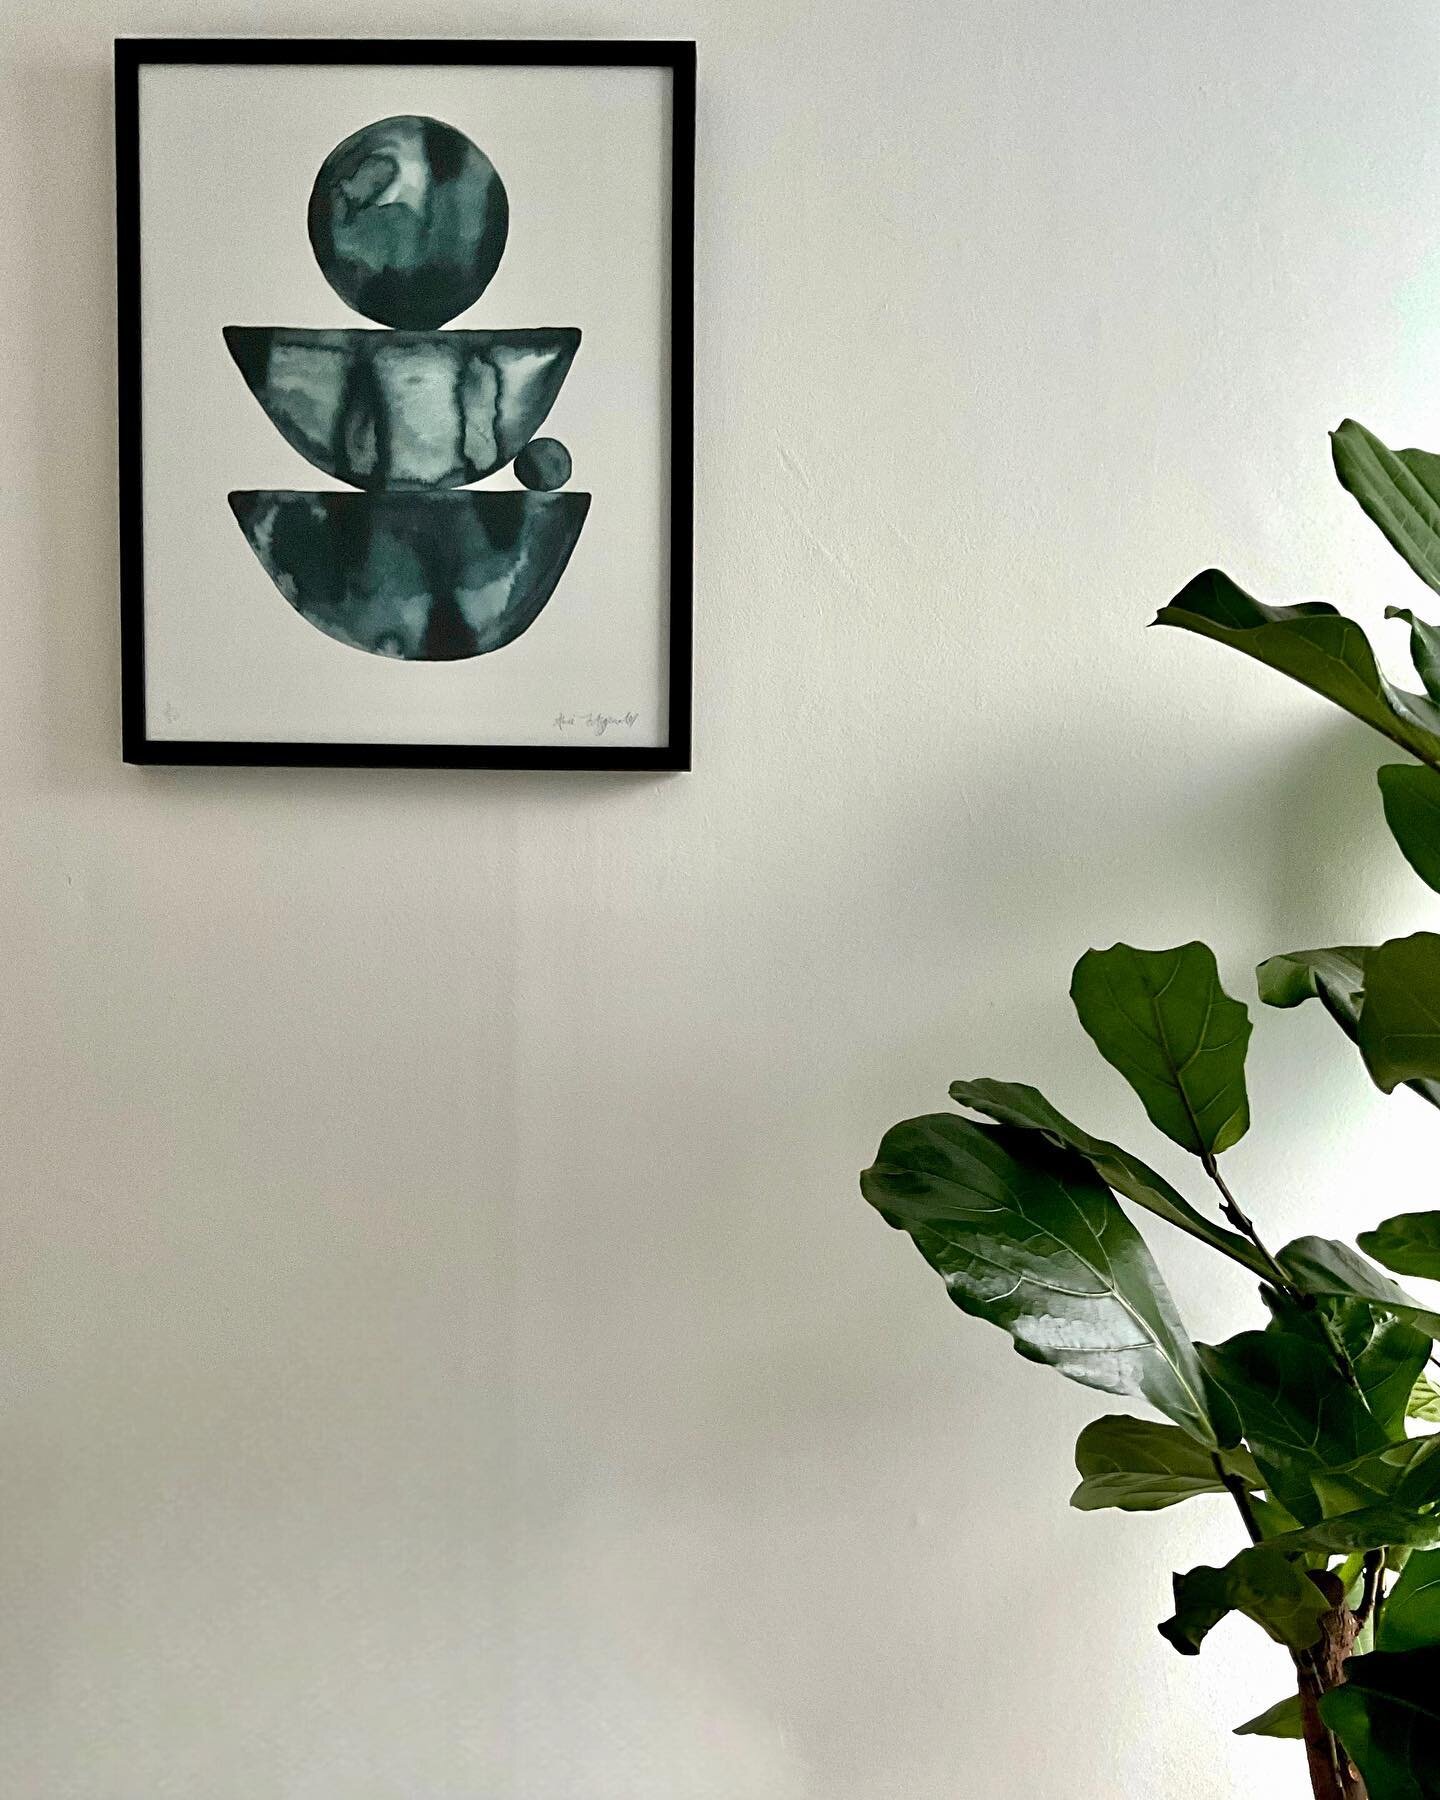 Hallway details from my Sandycove project. Artwork and plants always guaranteed to liven up any space. &lsquo;Ink Forms&rsquo; by the very talented @alicefitzgeraldart 

#interiors #interiordesigner #irishinteriors #hallway #hallwaydecor #plantdecor 